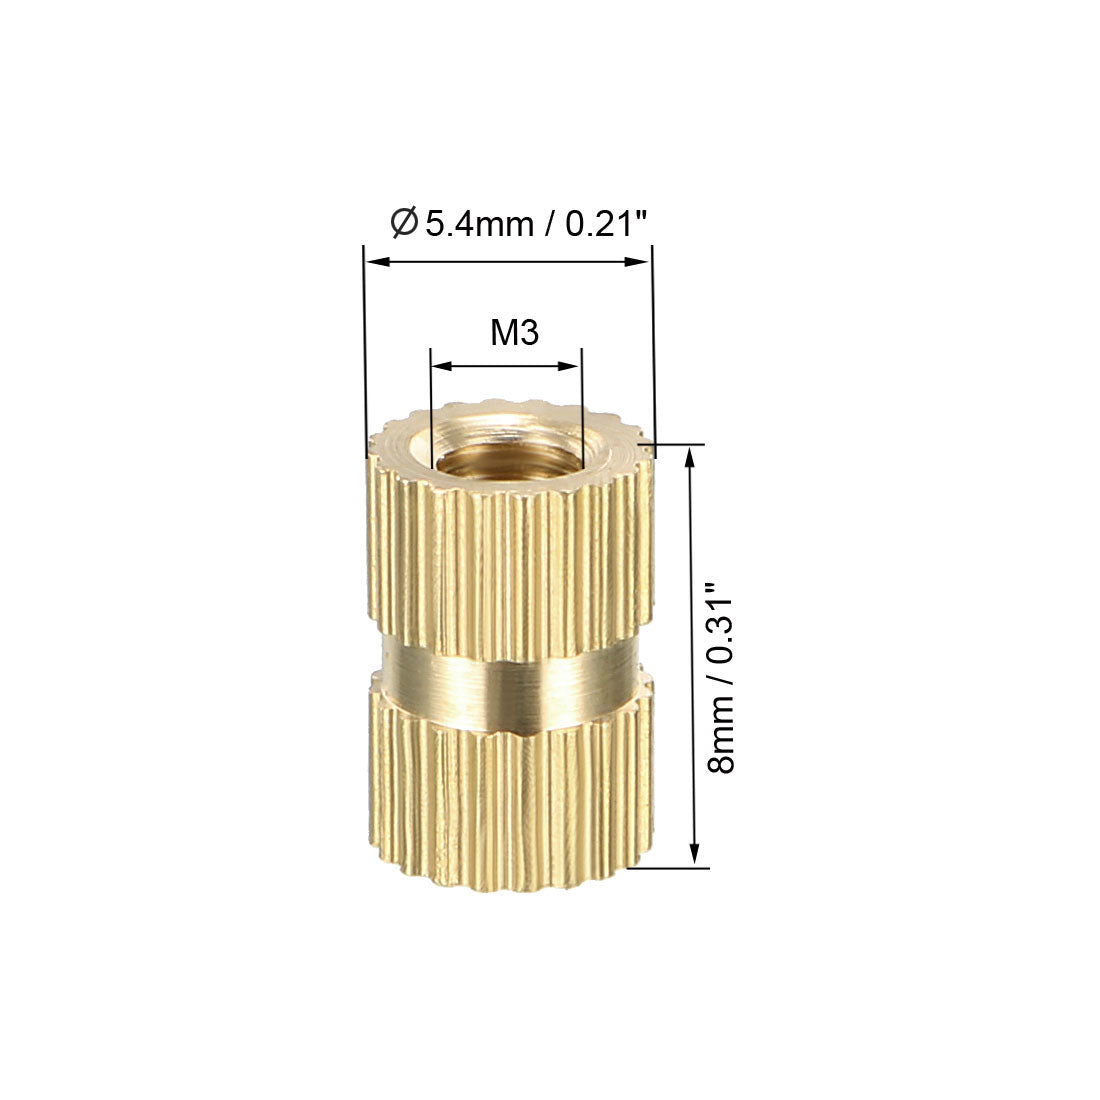 uxcell Uxcell Knurled Insert Nuts, Female Thread Brass Threaded Insert Embedment Nut, for 3D Printer